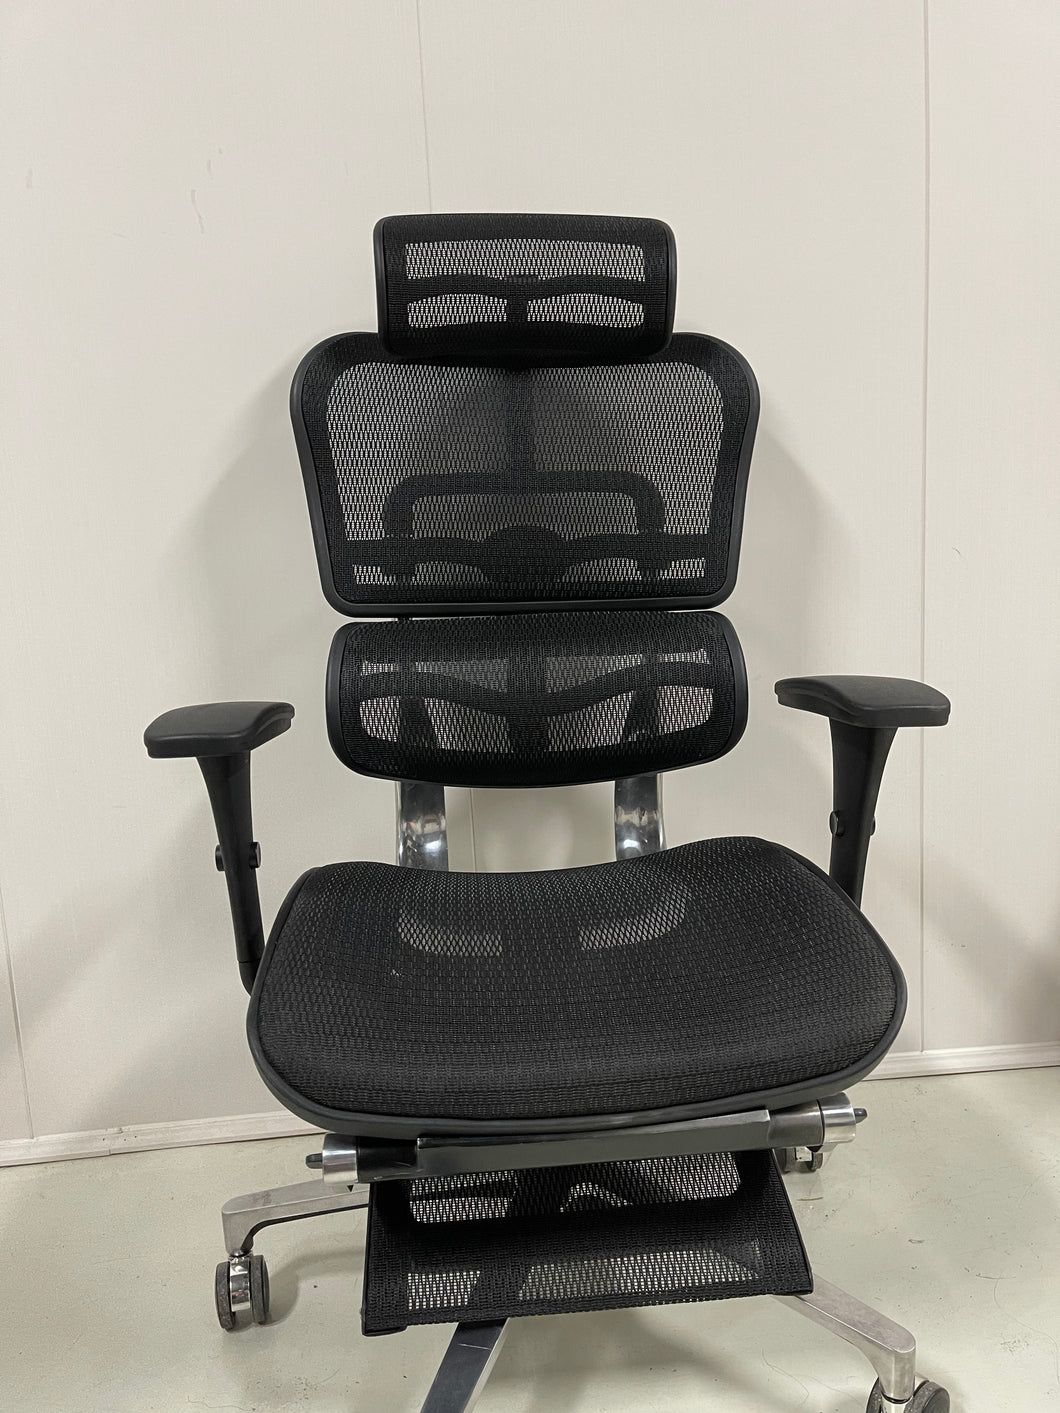 langsyne Office furniture,Ergonomic Mesh Office Chair, High Back Desk Chair with 3D Arms, Tilt Function, Lumbar Support and PU Wheels, Swivel Computer Task Chair with Armrests, Adjustable Height/Tilt, 360-Degree Swivel.